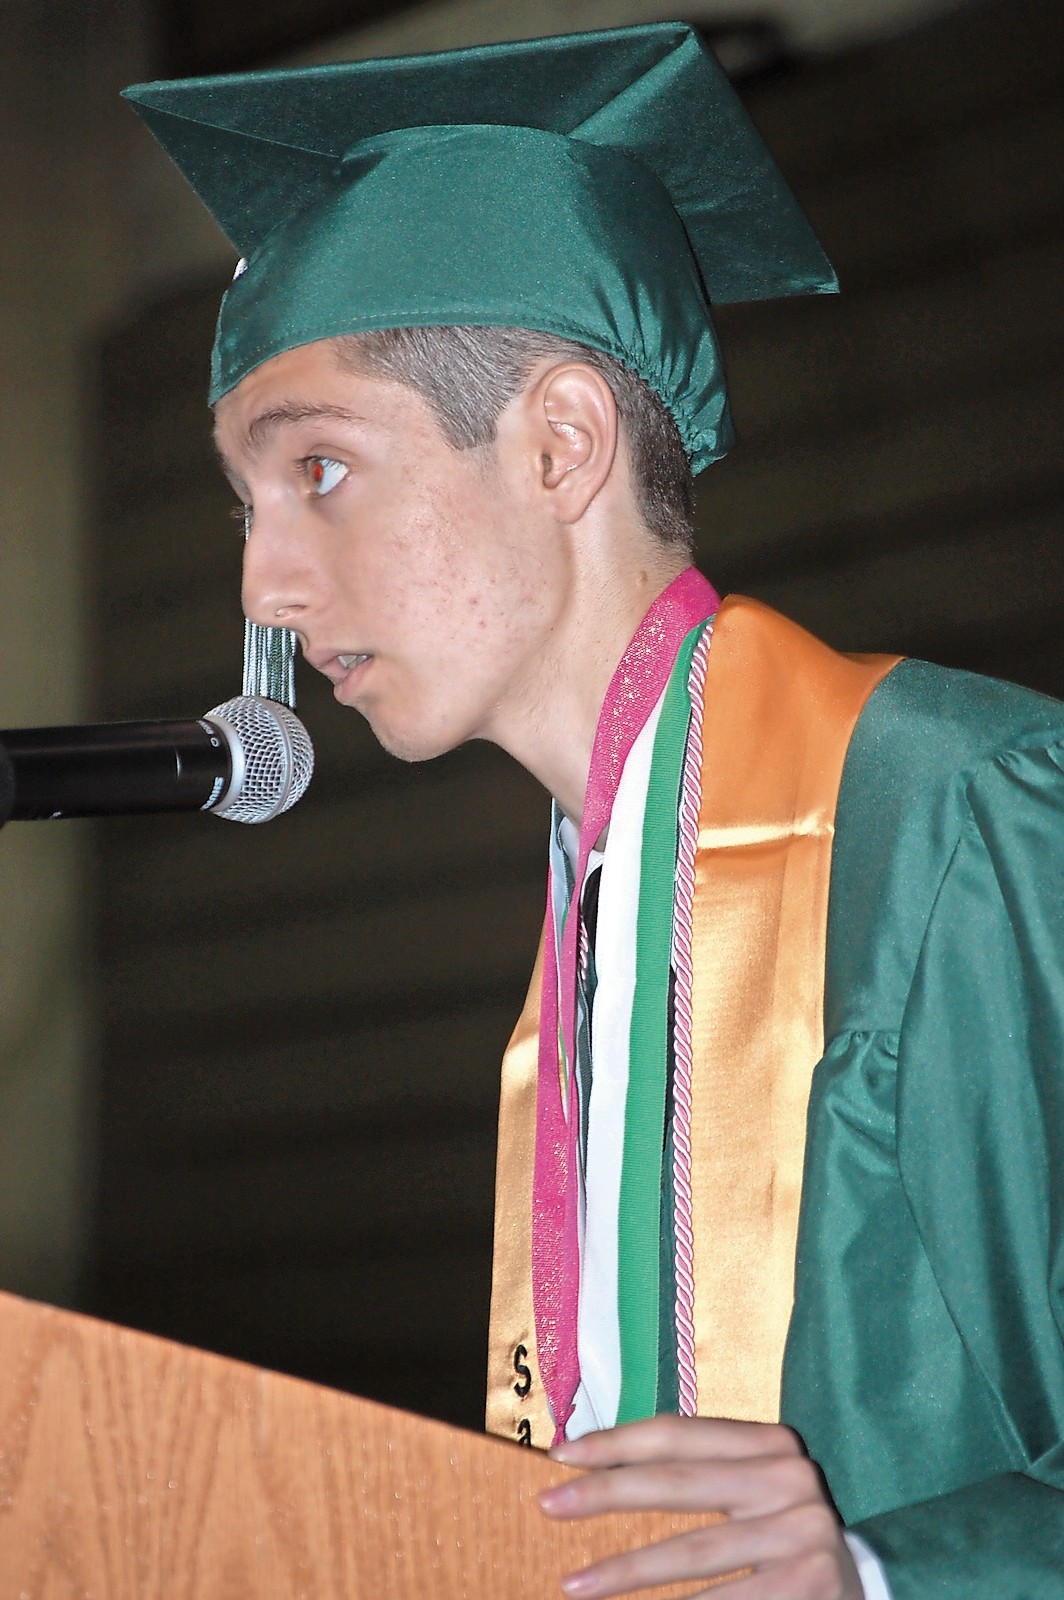 Salutatorian Nick Liuzzi used personal experiences dealing with health issues to offer words of inspiration to his fellow graduates.